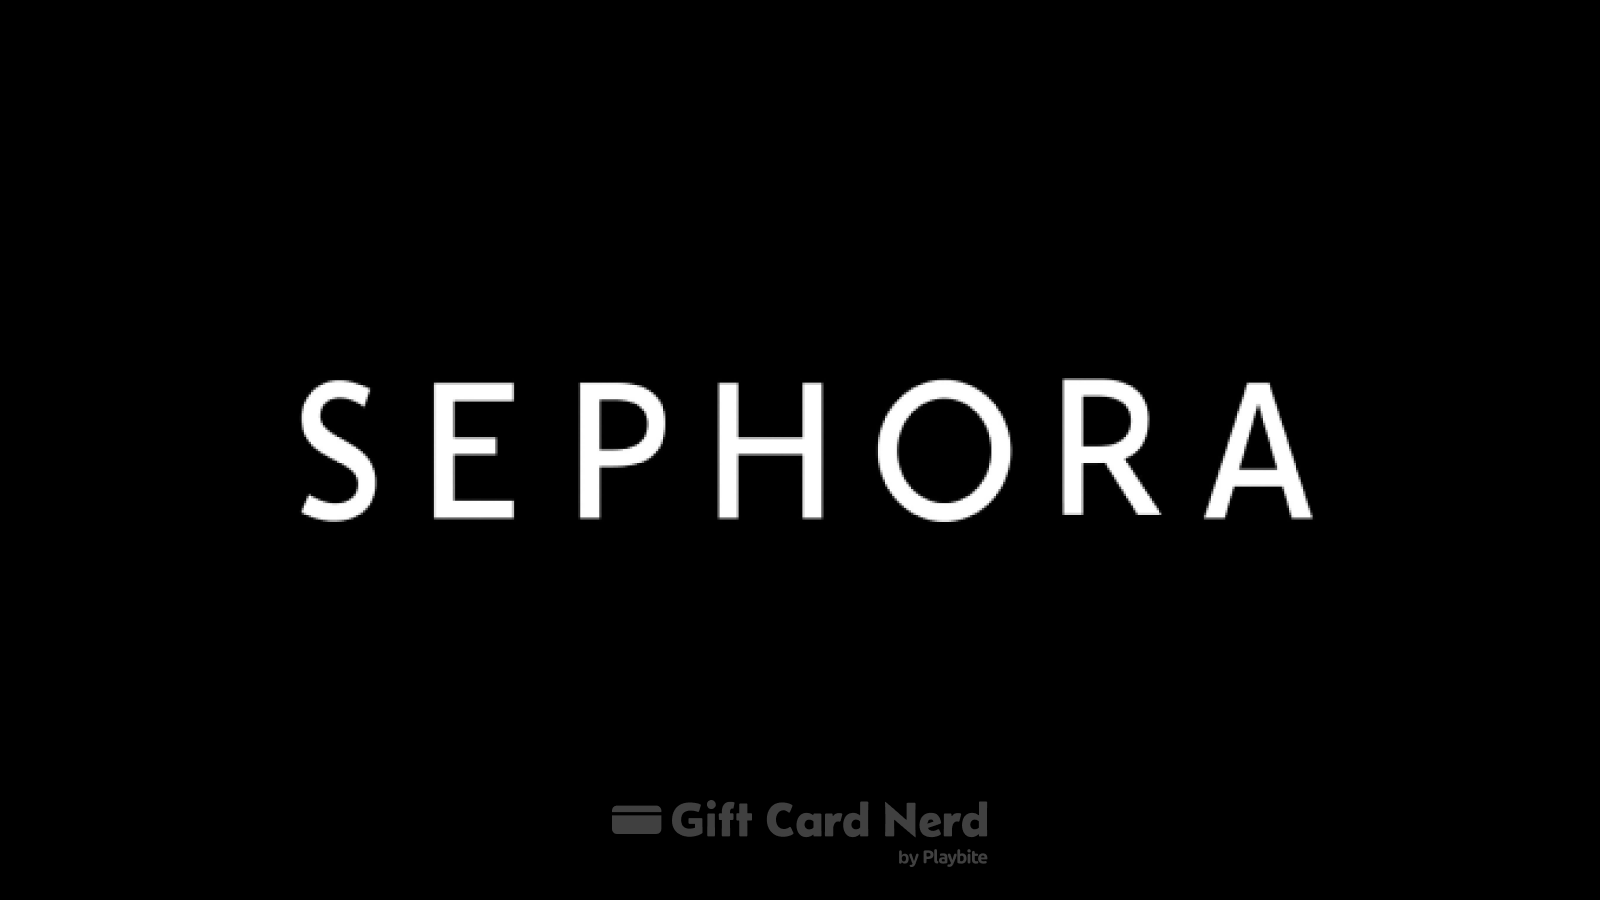 Can I Use a Sephora Gift Card on Postmates?